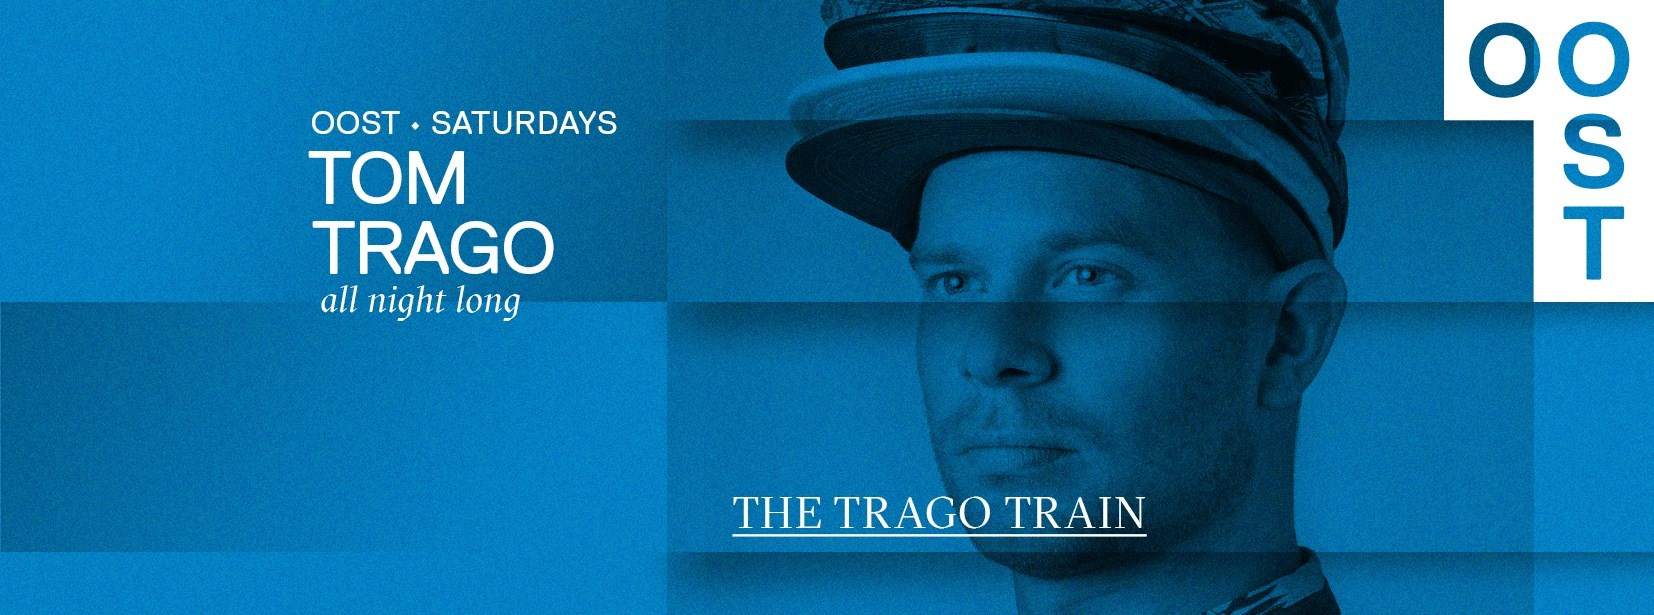 OOST - Saturdays: Tom Trago (Attend for Free Entrance) - フライヤー表